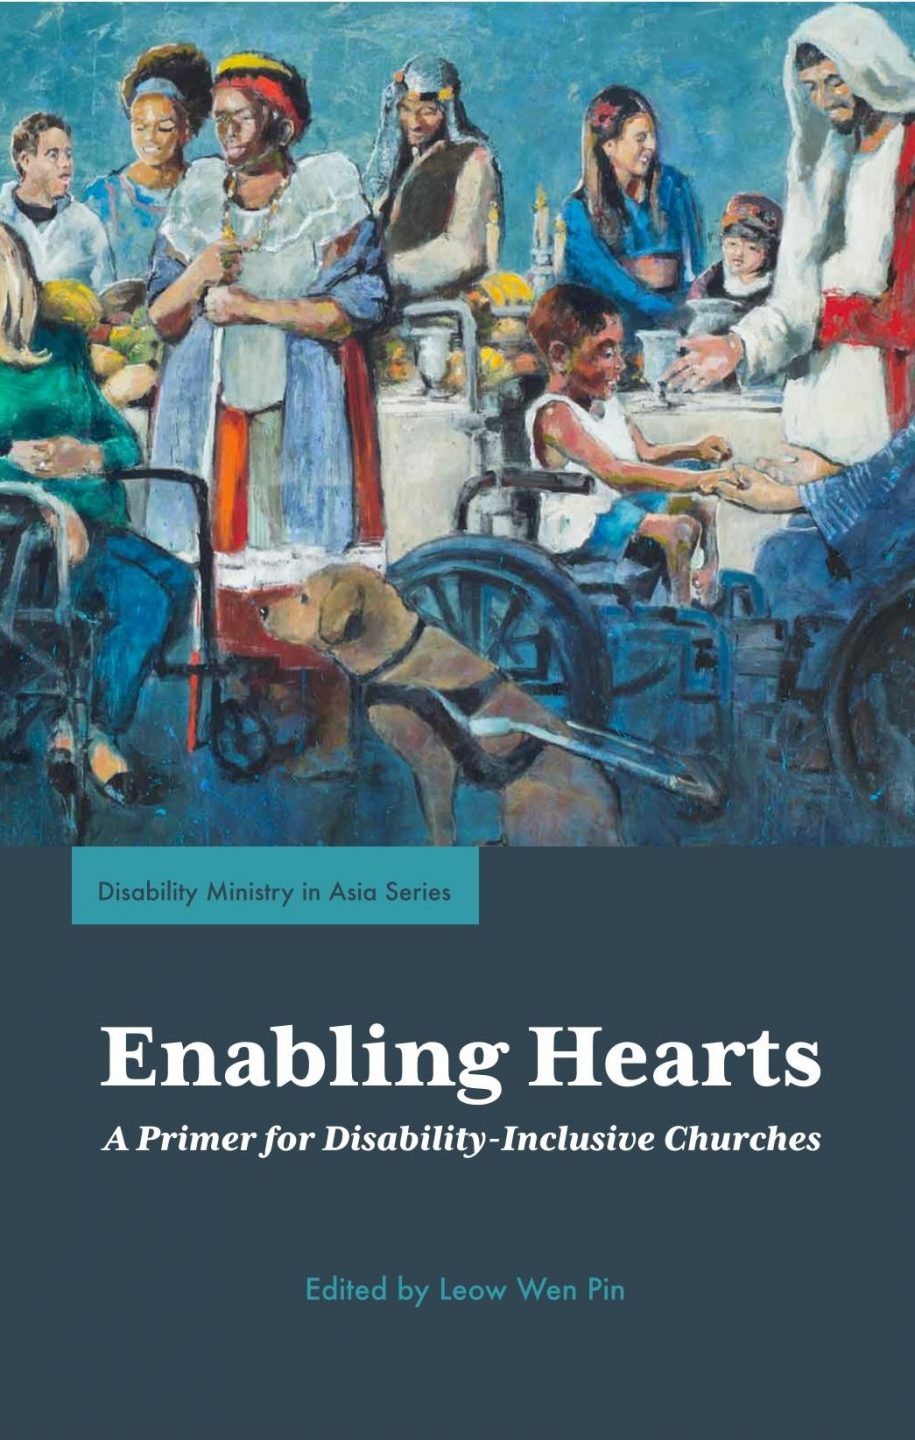 The cover of Enabling Hearts features a painting by the artist Hyatt Moore entitled Luke 14 Banquet. The painting is based on the banquet in Jesus’ parable in Luke 14, where the “poor, the crippled, the lame, the blind”. Every individual featured in the painting a real person with disability who posed for the photo. The painting was commissioned by Joni and Friends, a leading disability ministry based in the US. Photo courtesy of KIN.